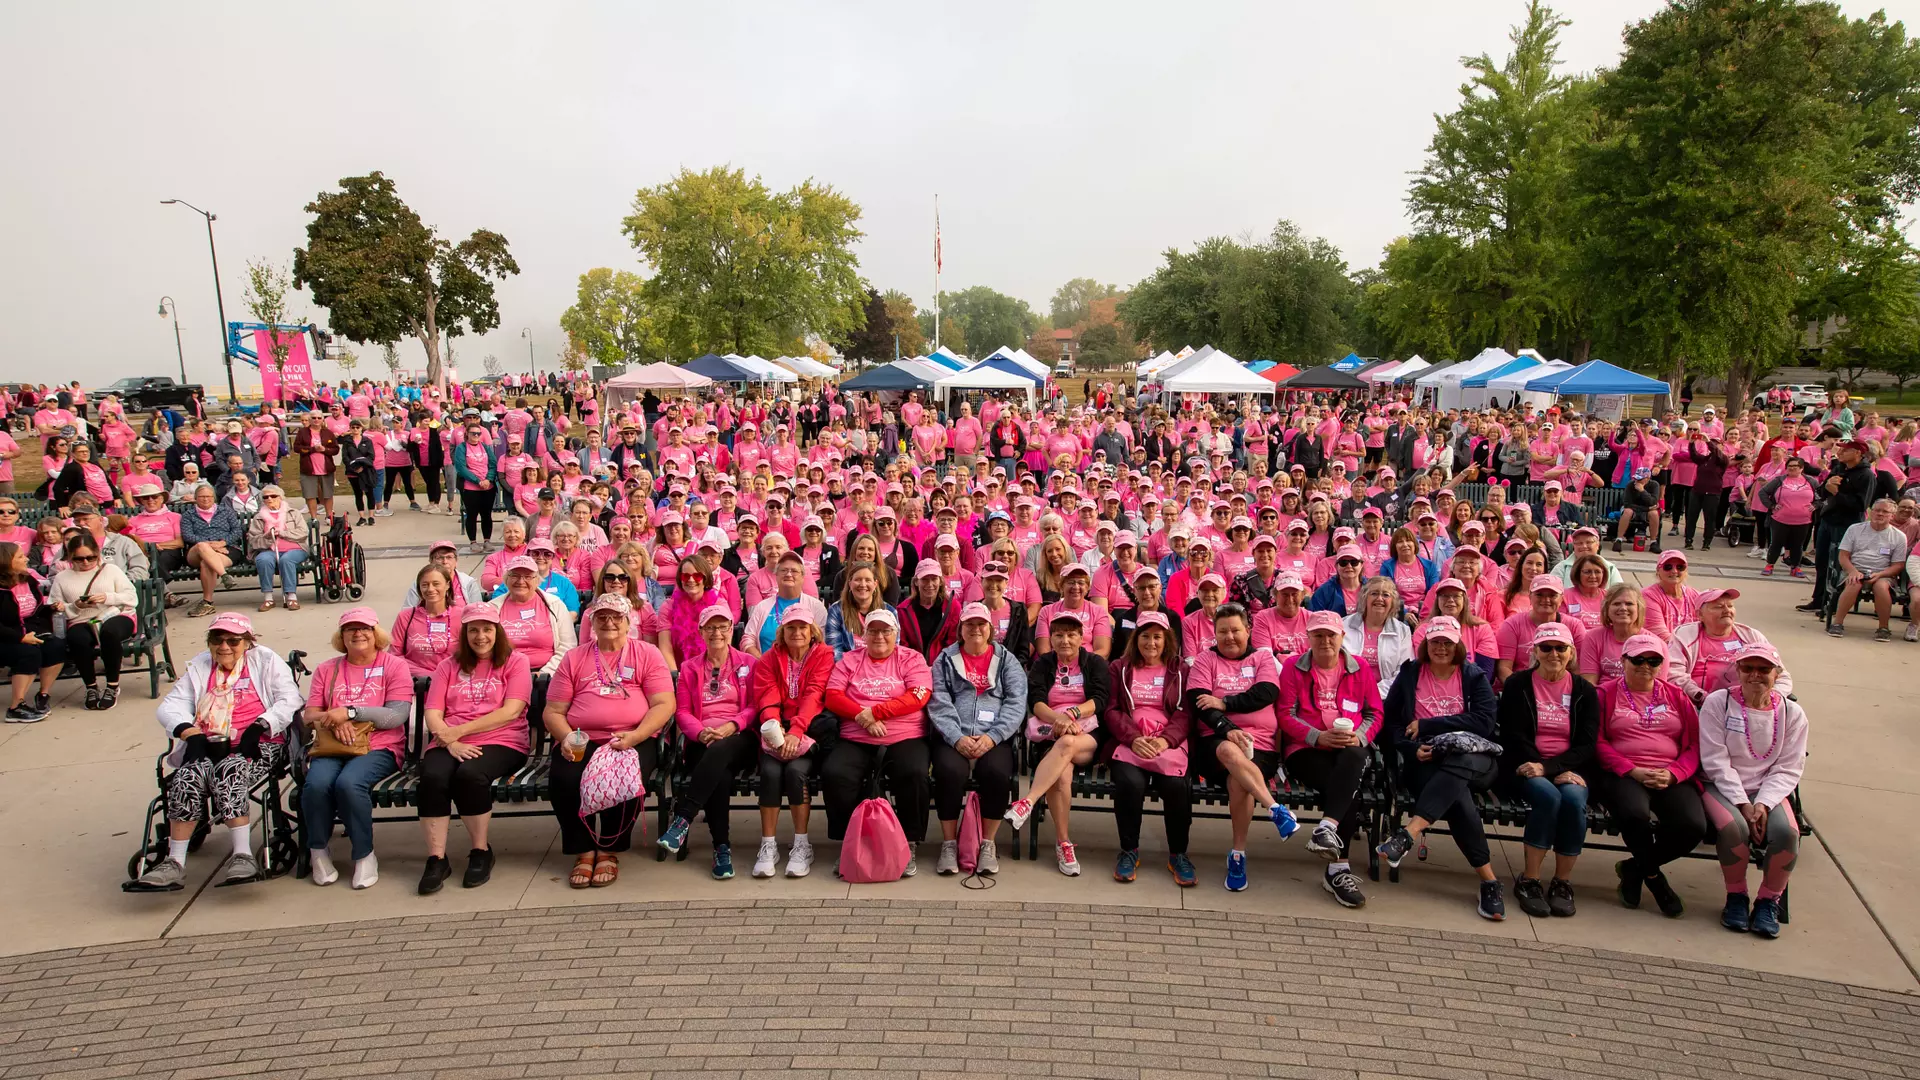 Breast cancer survivors and supporters prepare to walk in Steppin’ Out in Pink